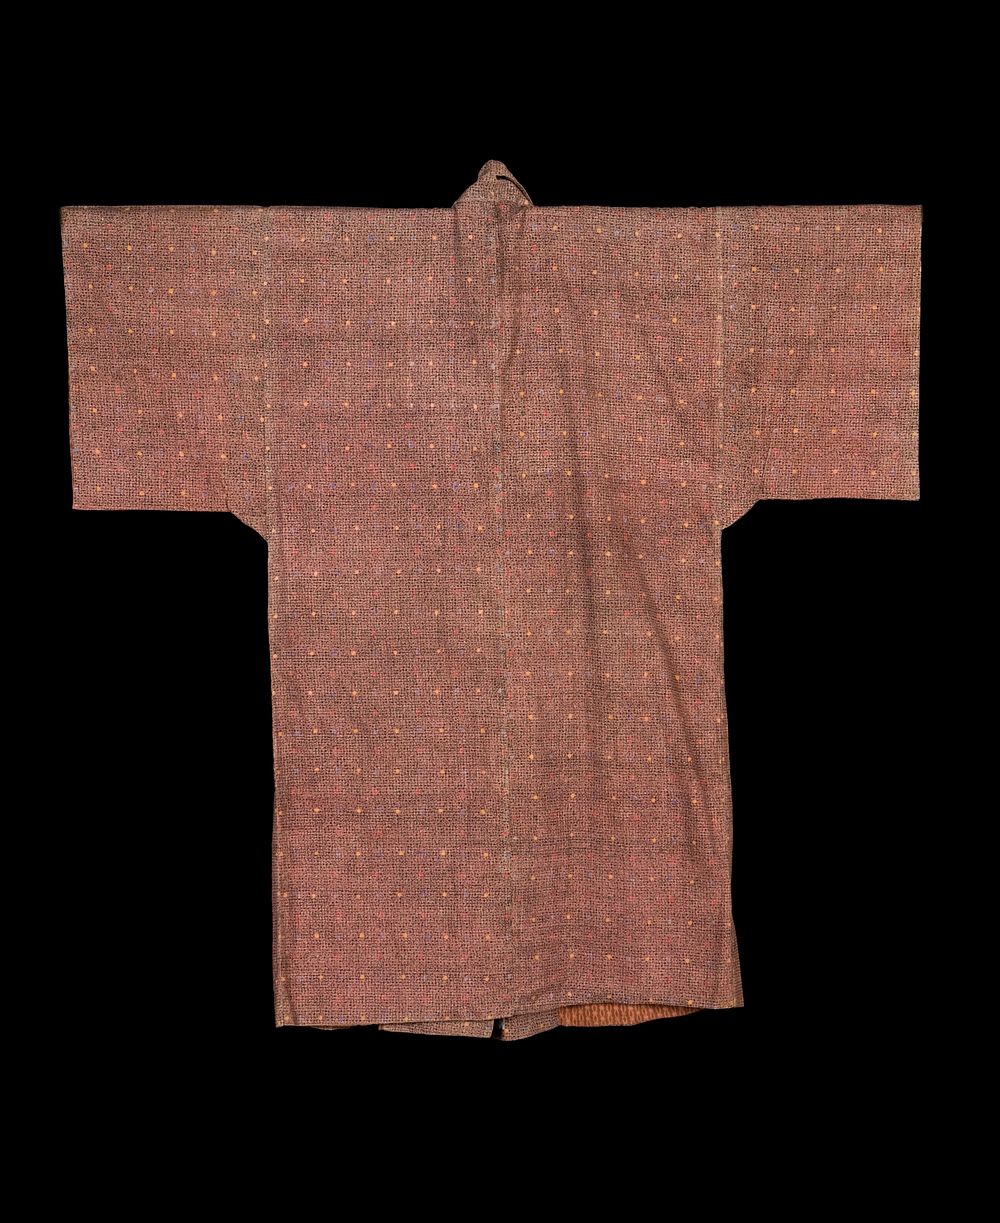 Purple-ground Ryūkyūan robe (ryūso) with dot pattern during 19th century clothing in high resolution.  Original from the…